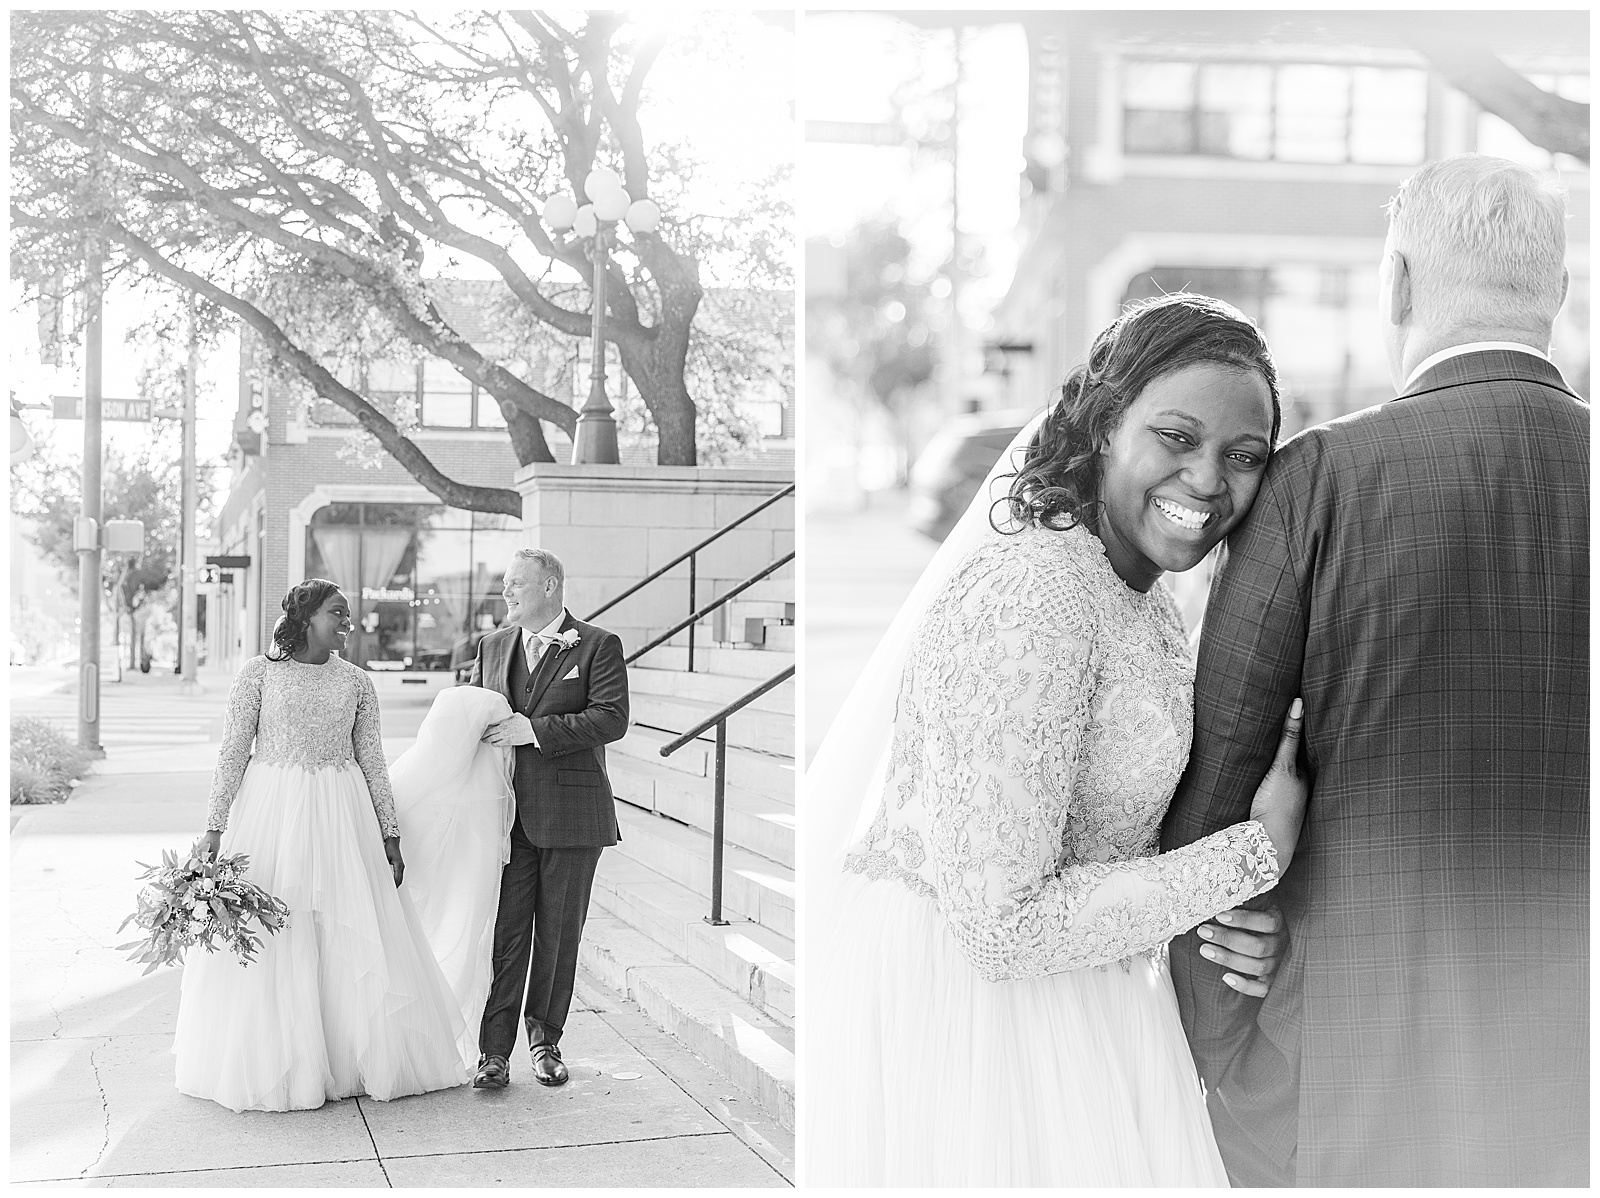 Black and white photo's of bride and groom walking